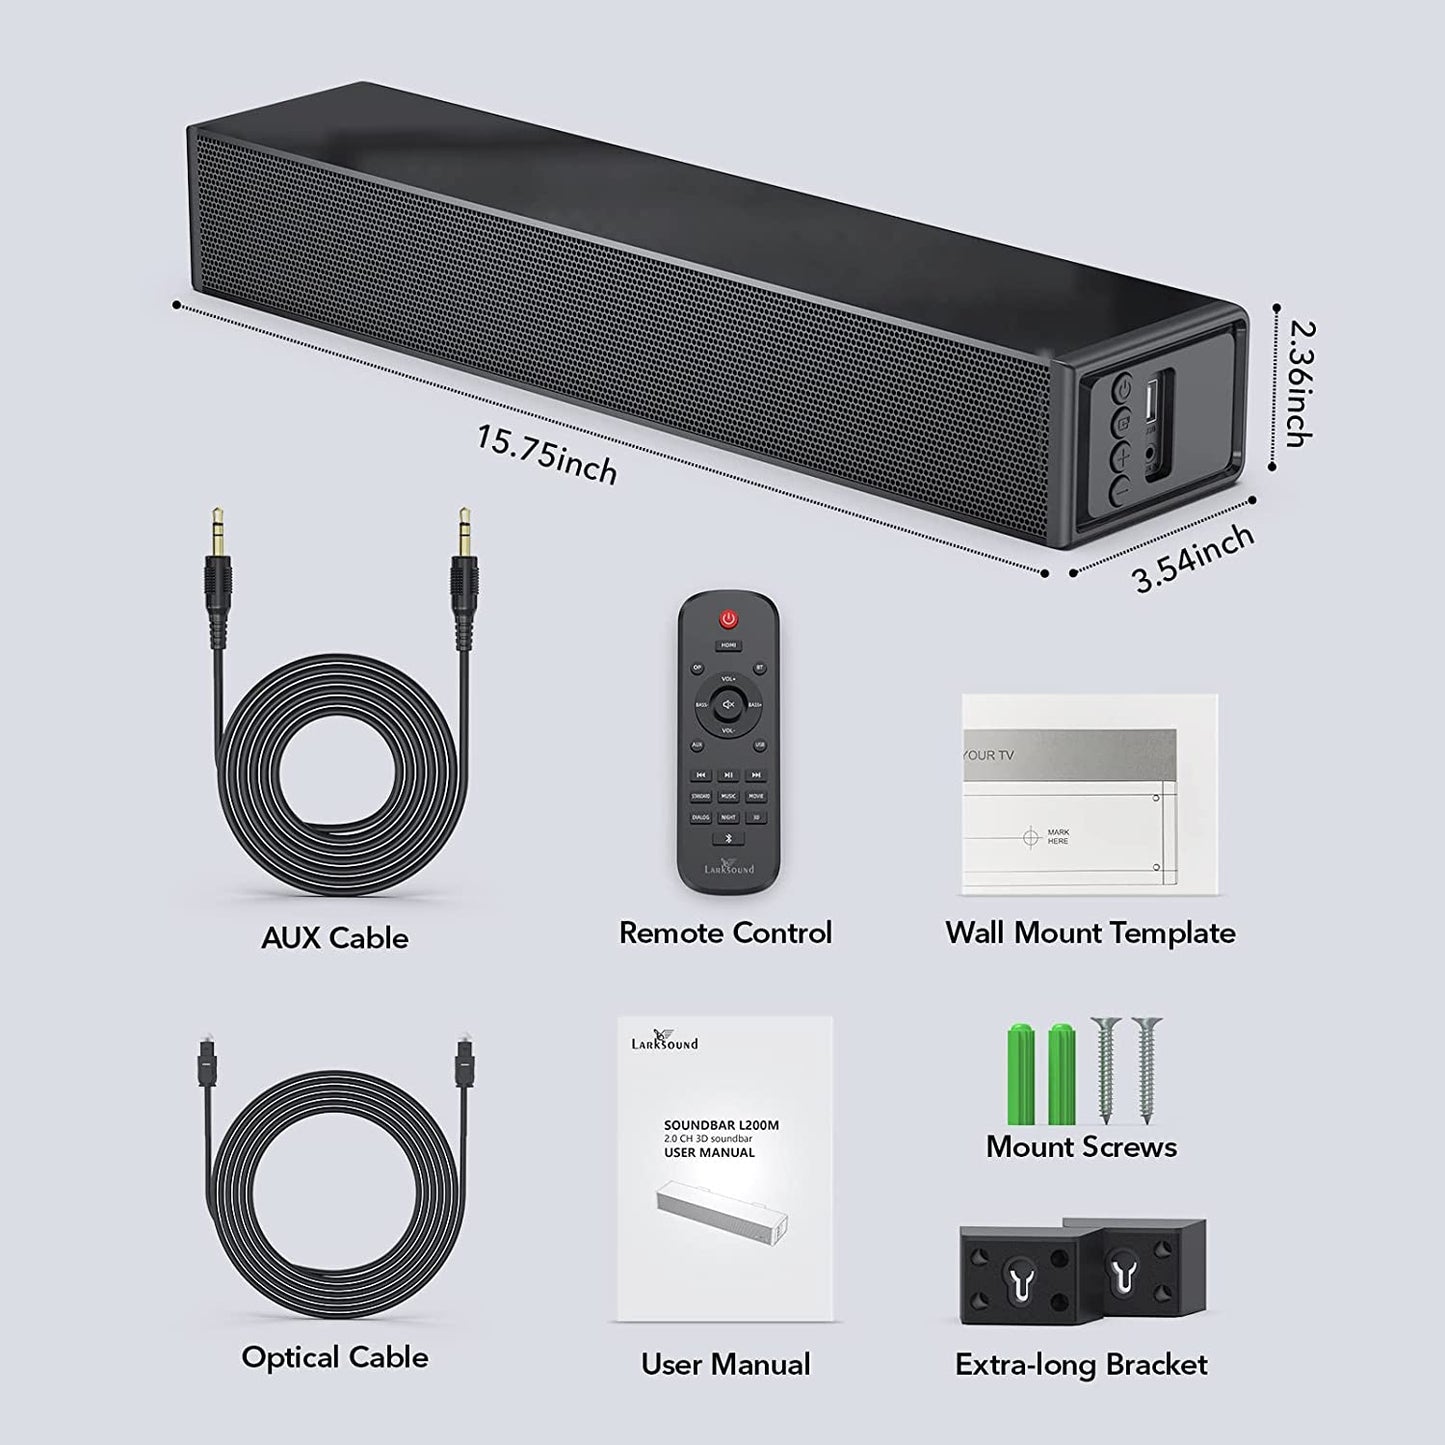 Compact Soundbar with Bluetooth, HDMI Arc, Optical, AUX, and USB Connections - Ideal for TV, PC, Gaming, and Surround Sound System